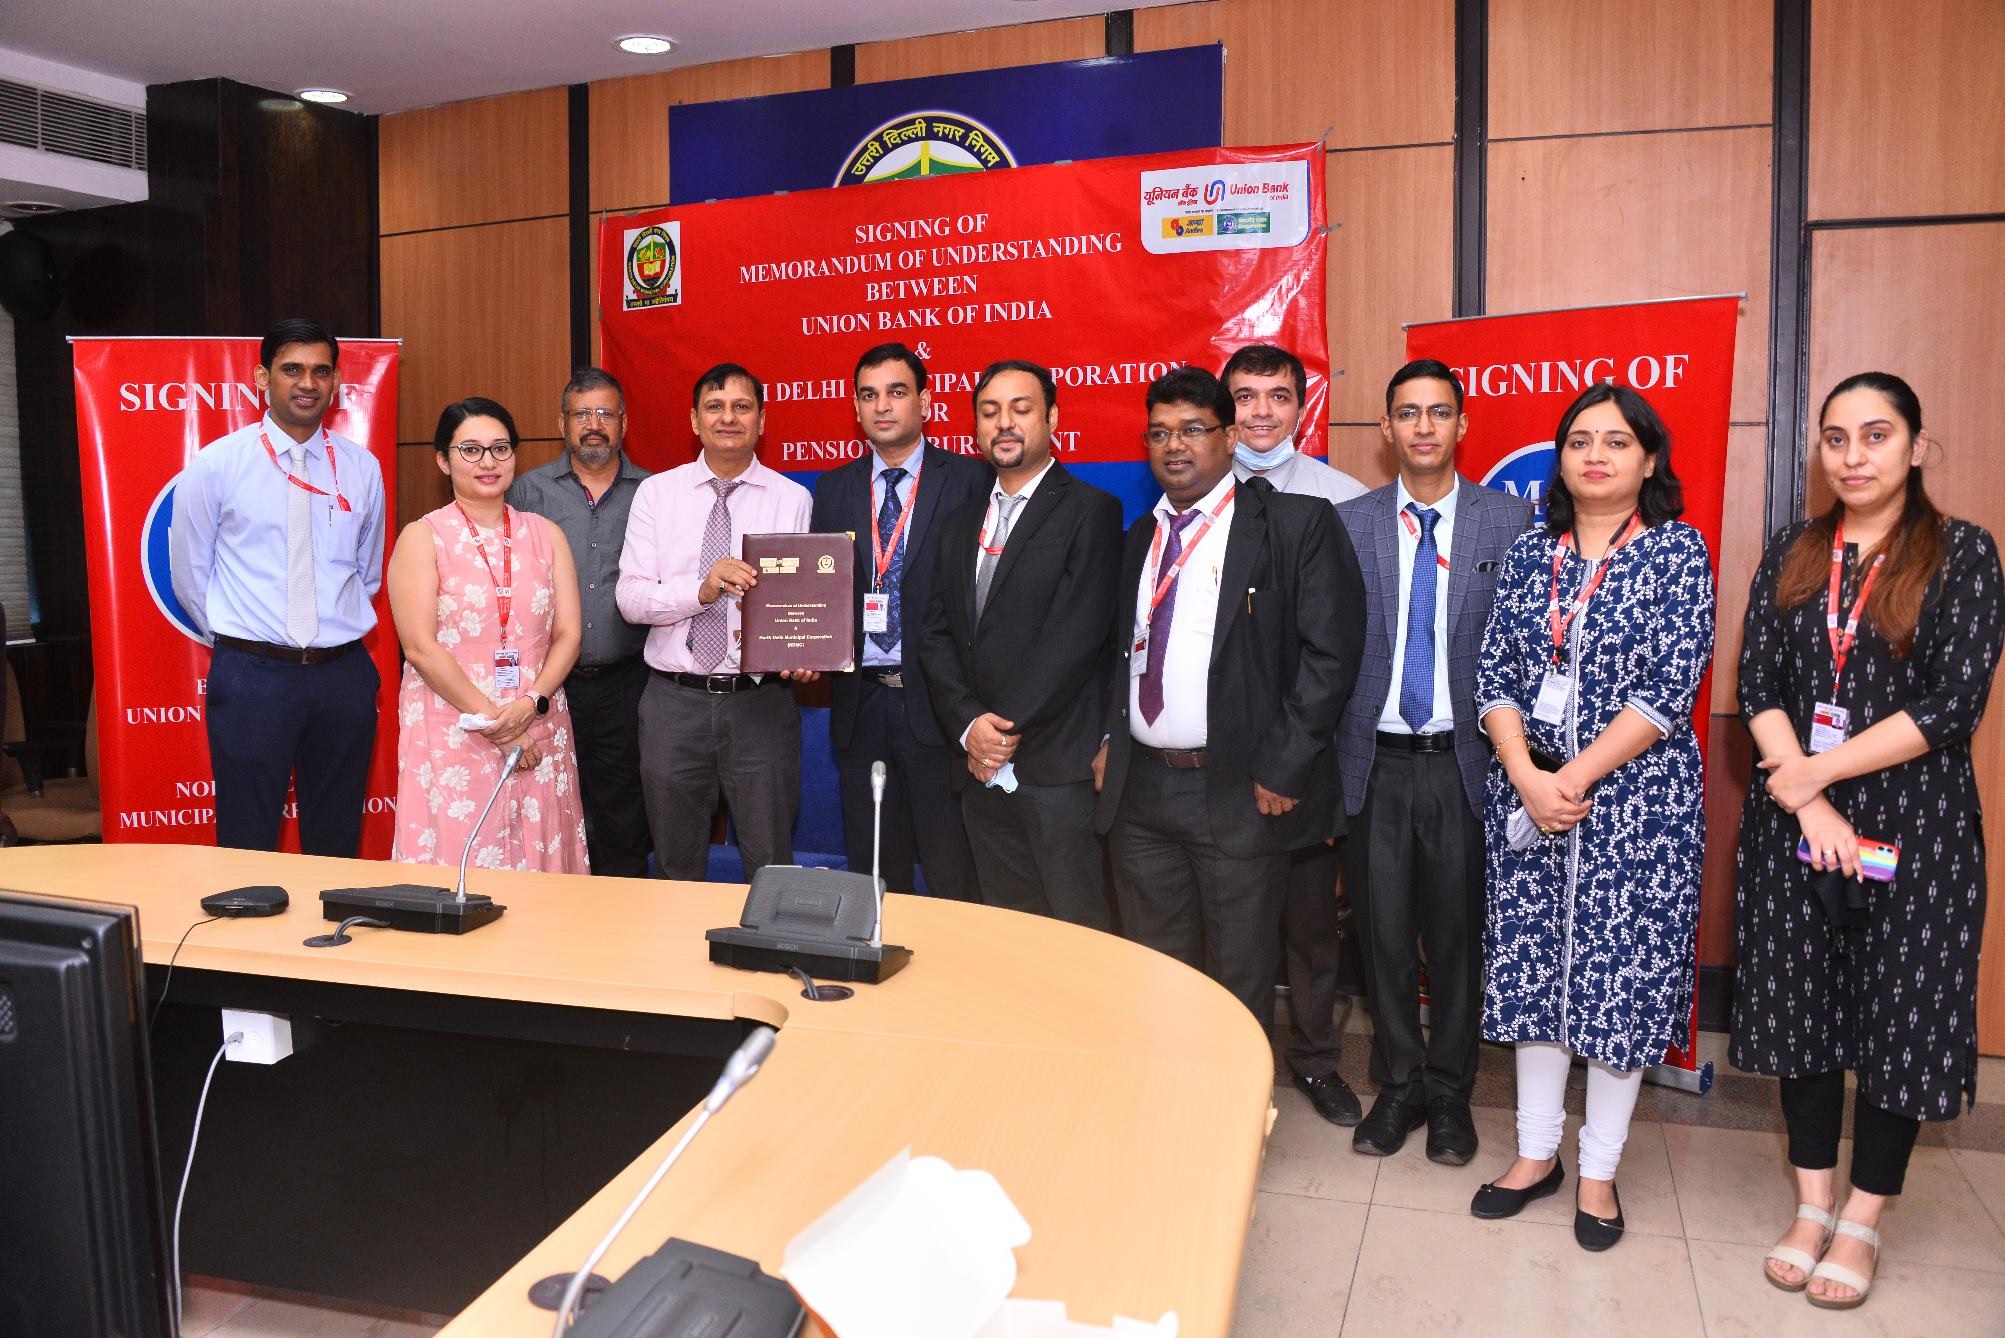 union-bank-of-india-signs-mou-with-north-delhi-municipal-corporation-for-pension-disbursement-of-their-employees